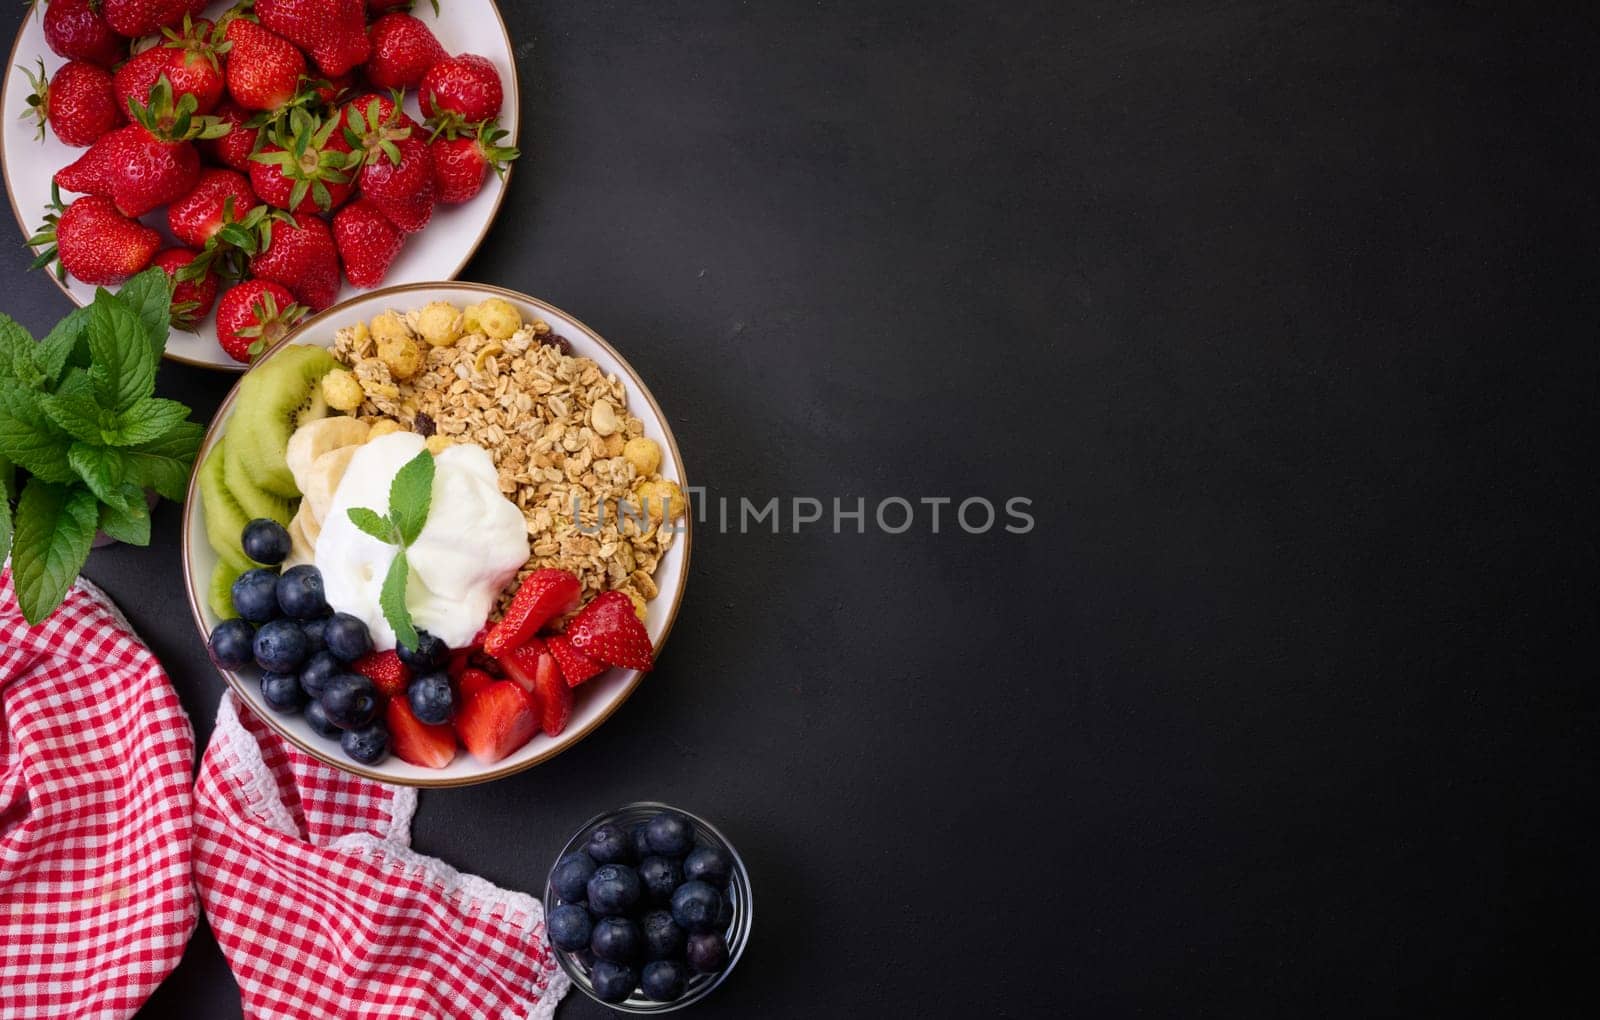 Healthy breakfast. Granola with strawberries, kiwi, banana and blueberries in a round plate on a black table. Healthy and tasty food, copy space